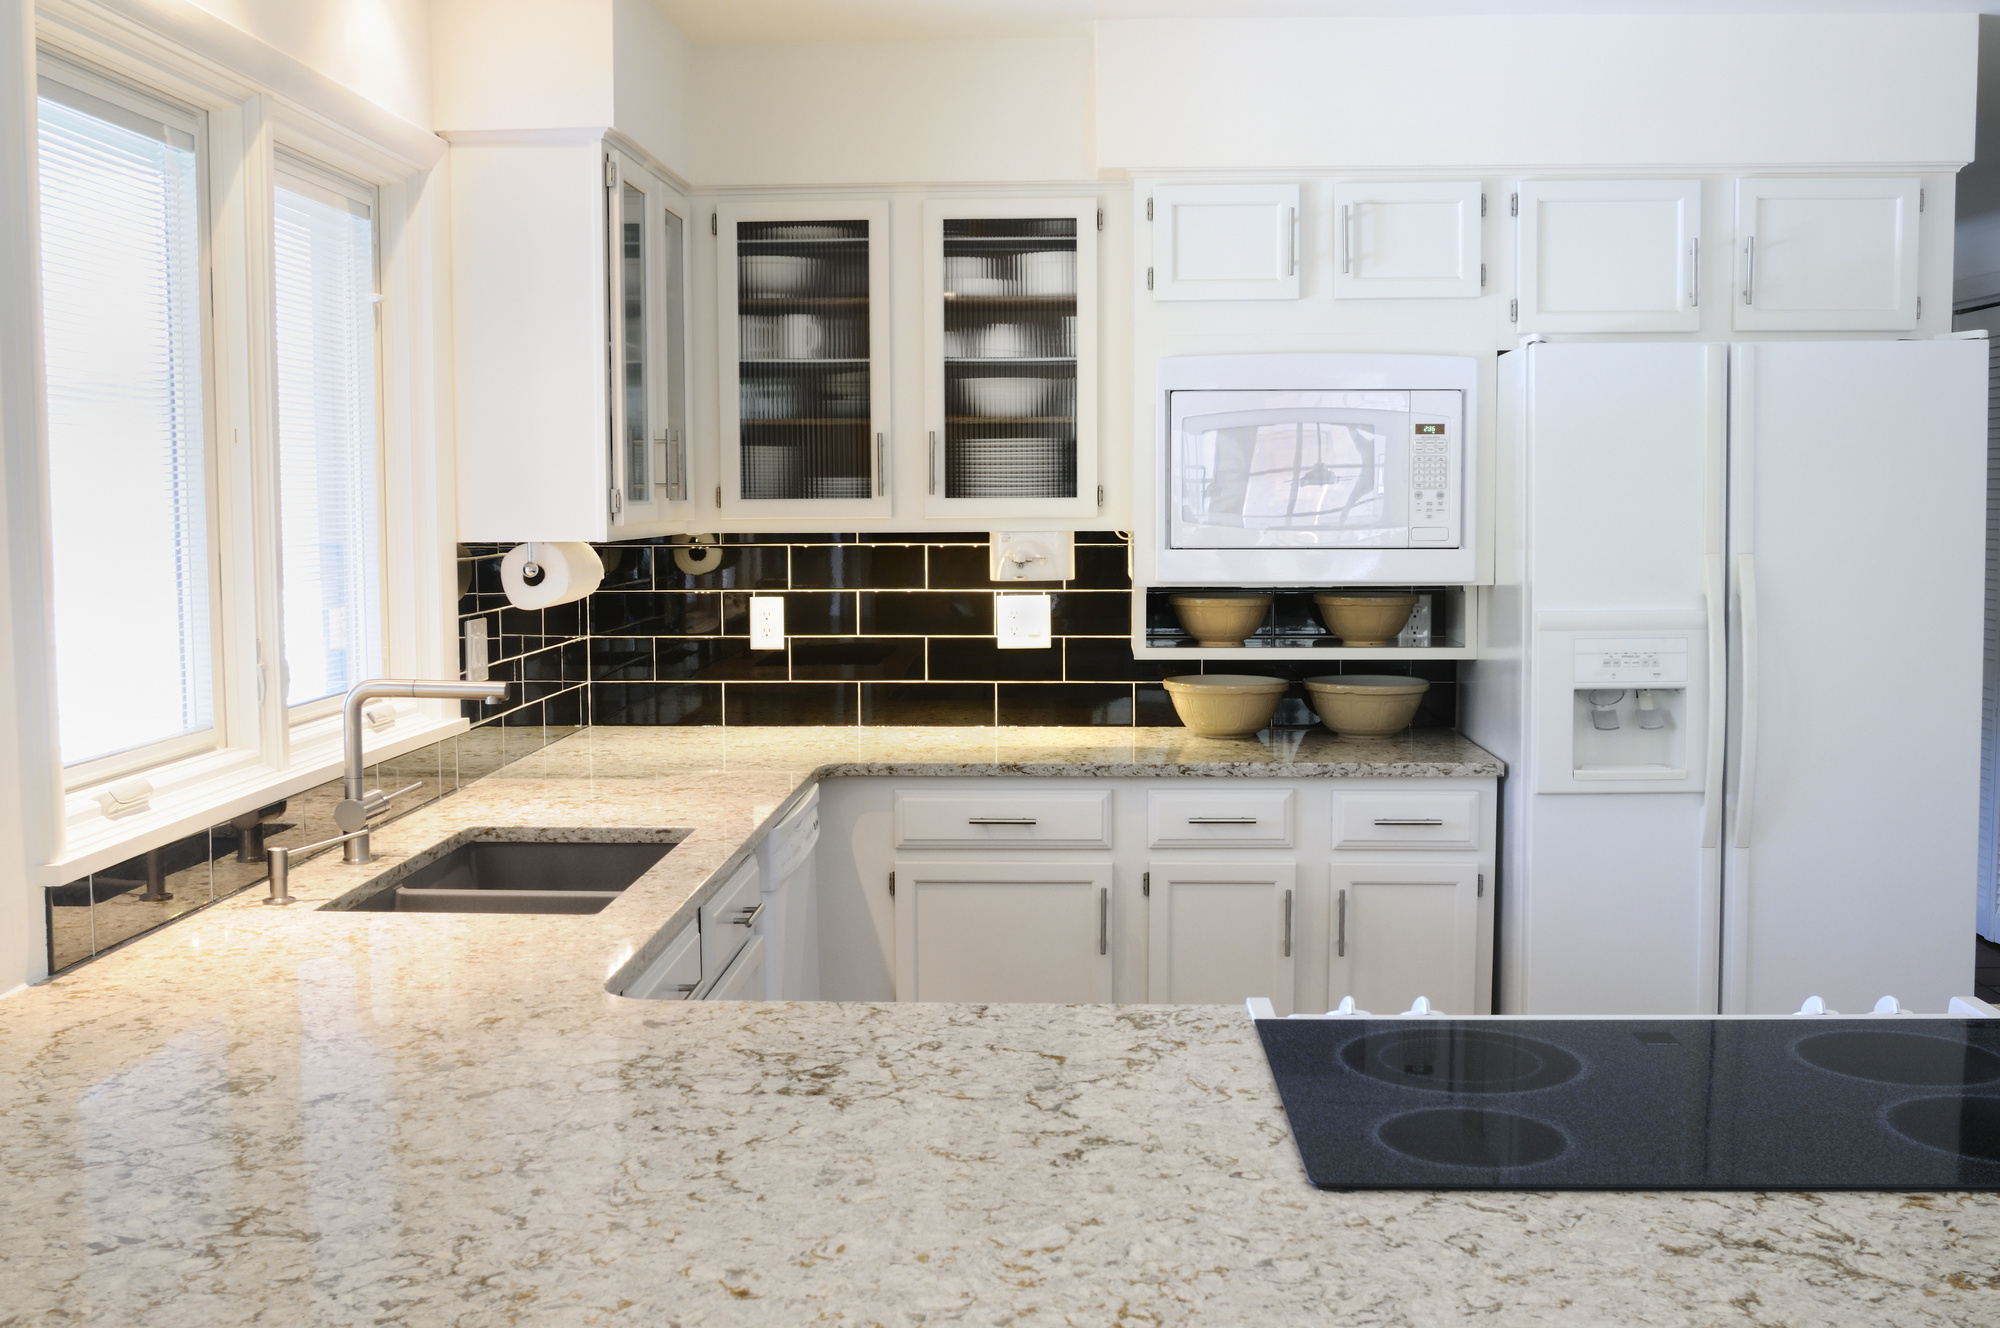 Custom Countertops: What To Consider When Choosing Yours